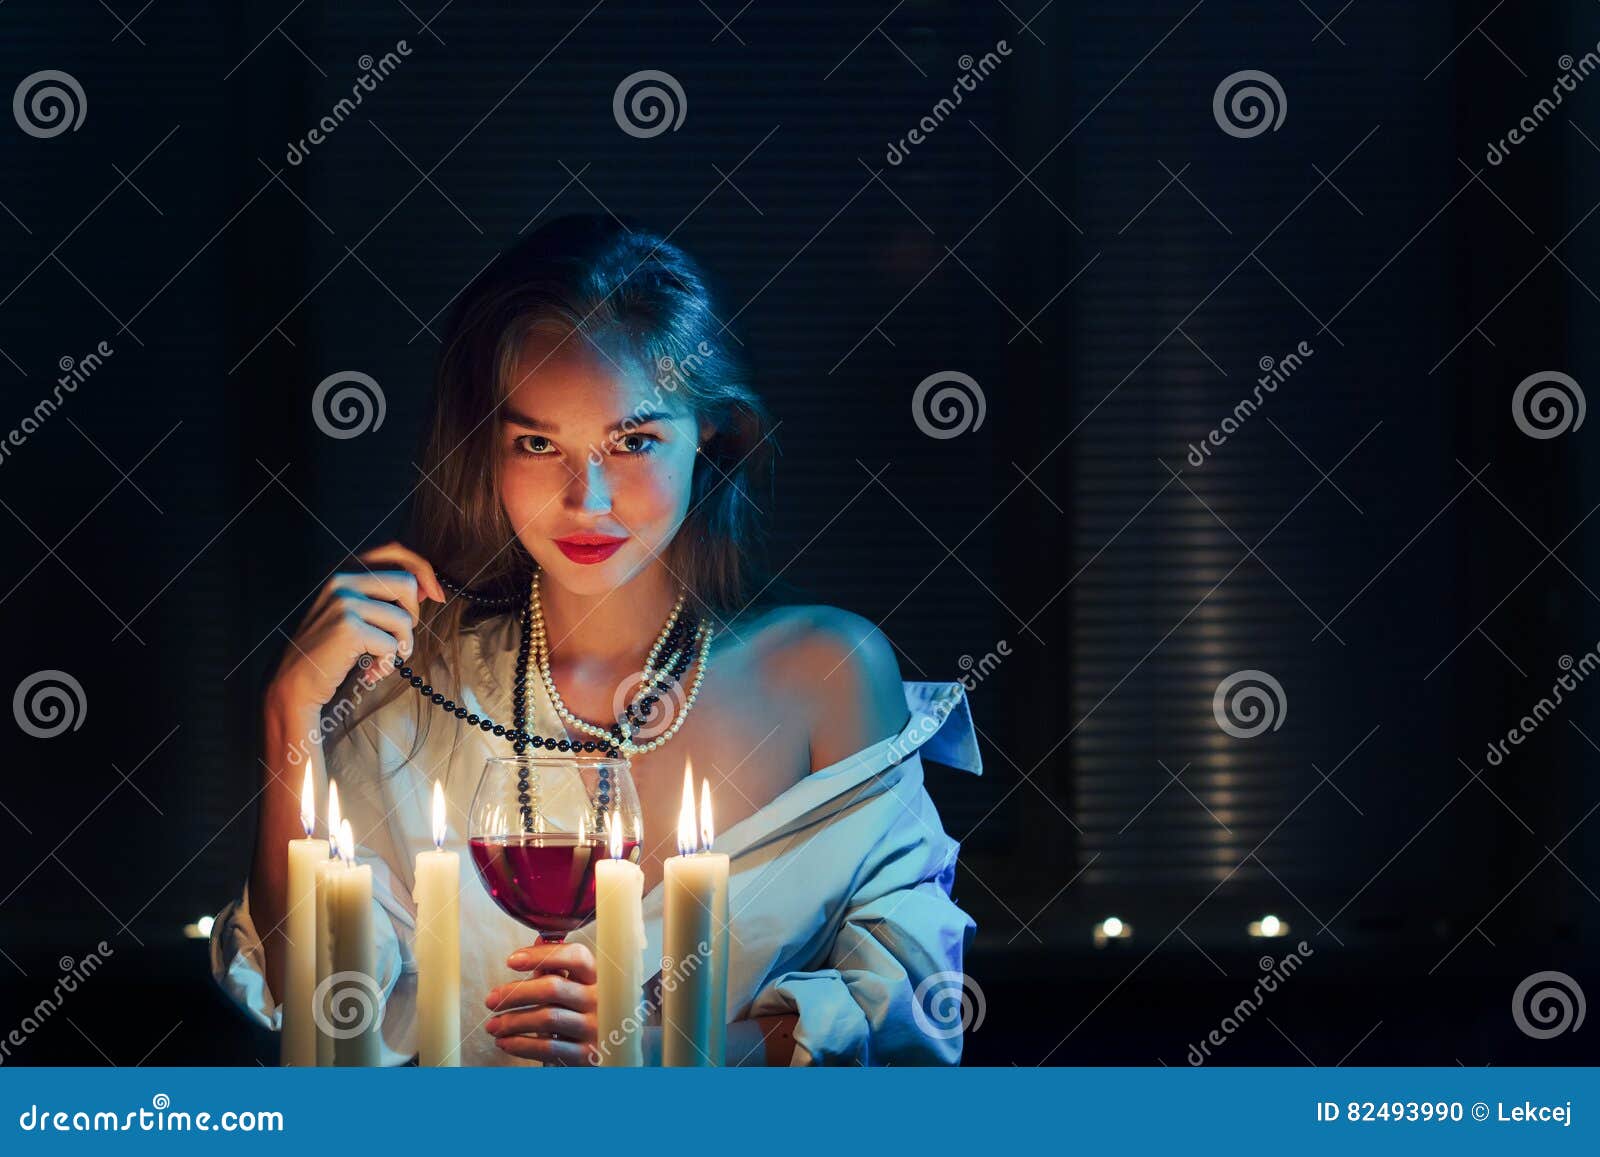 Woman With Candles Stock Photo Image Of Dark Interior